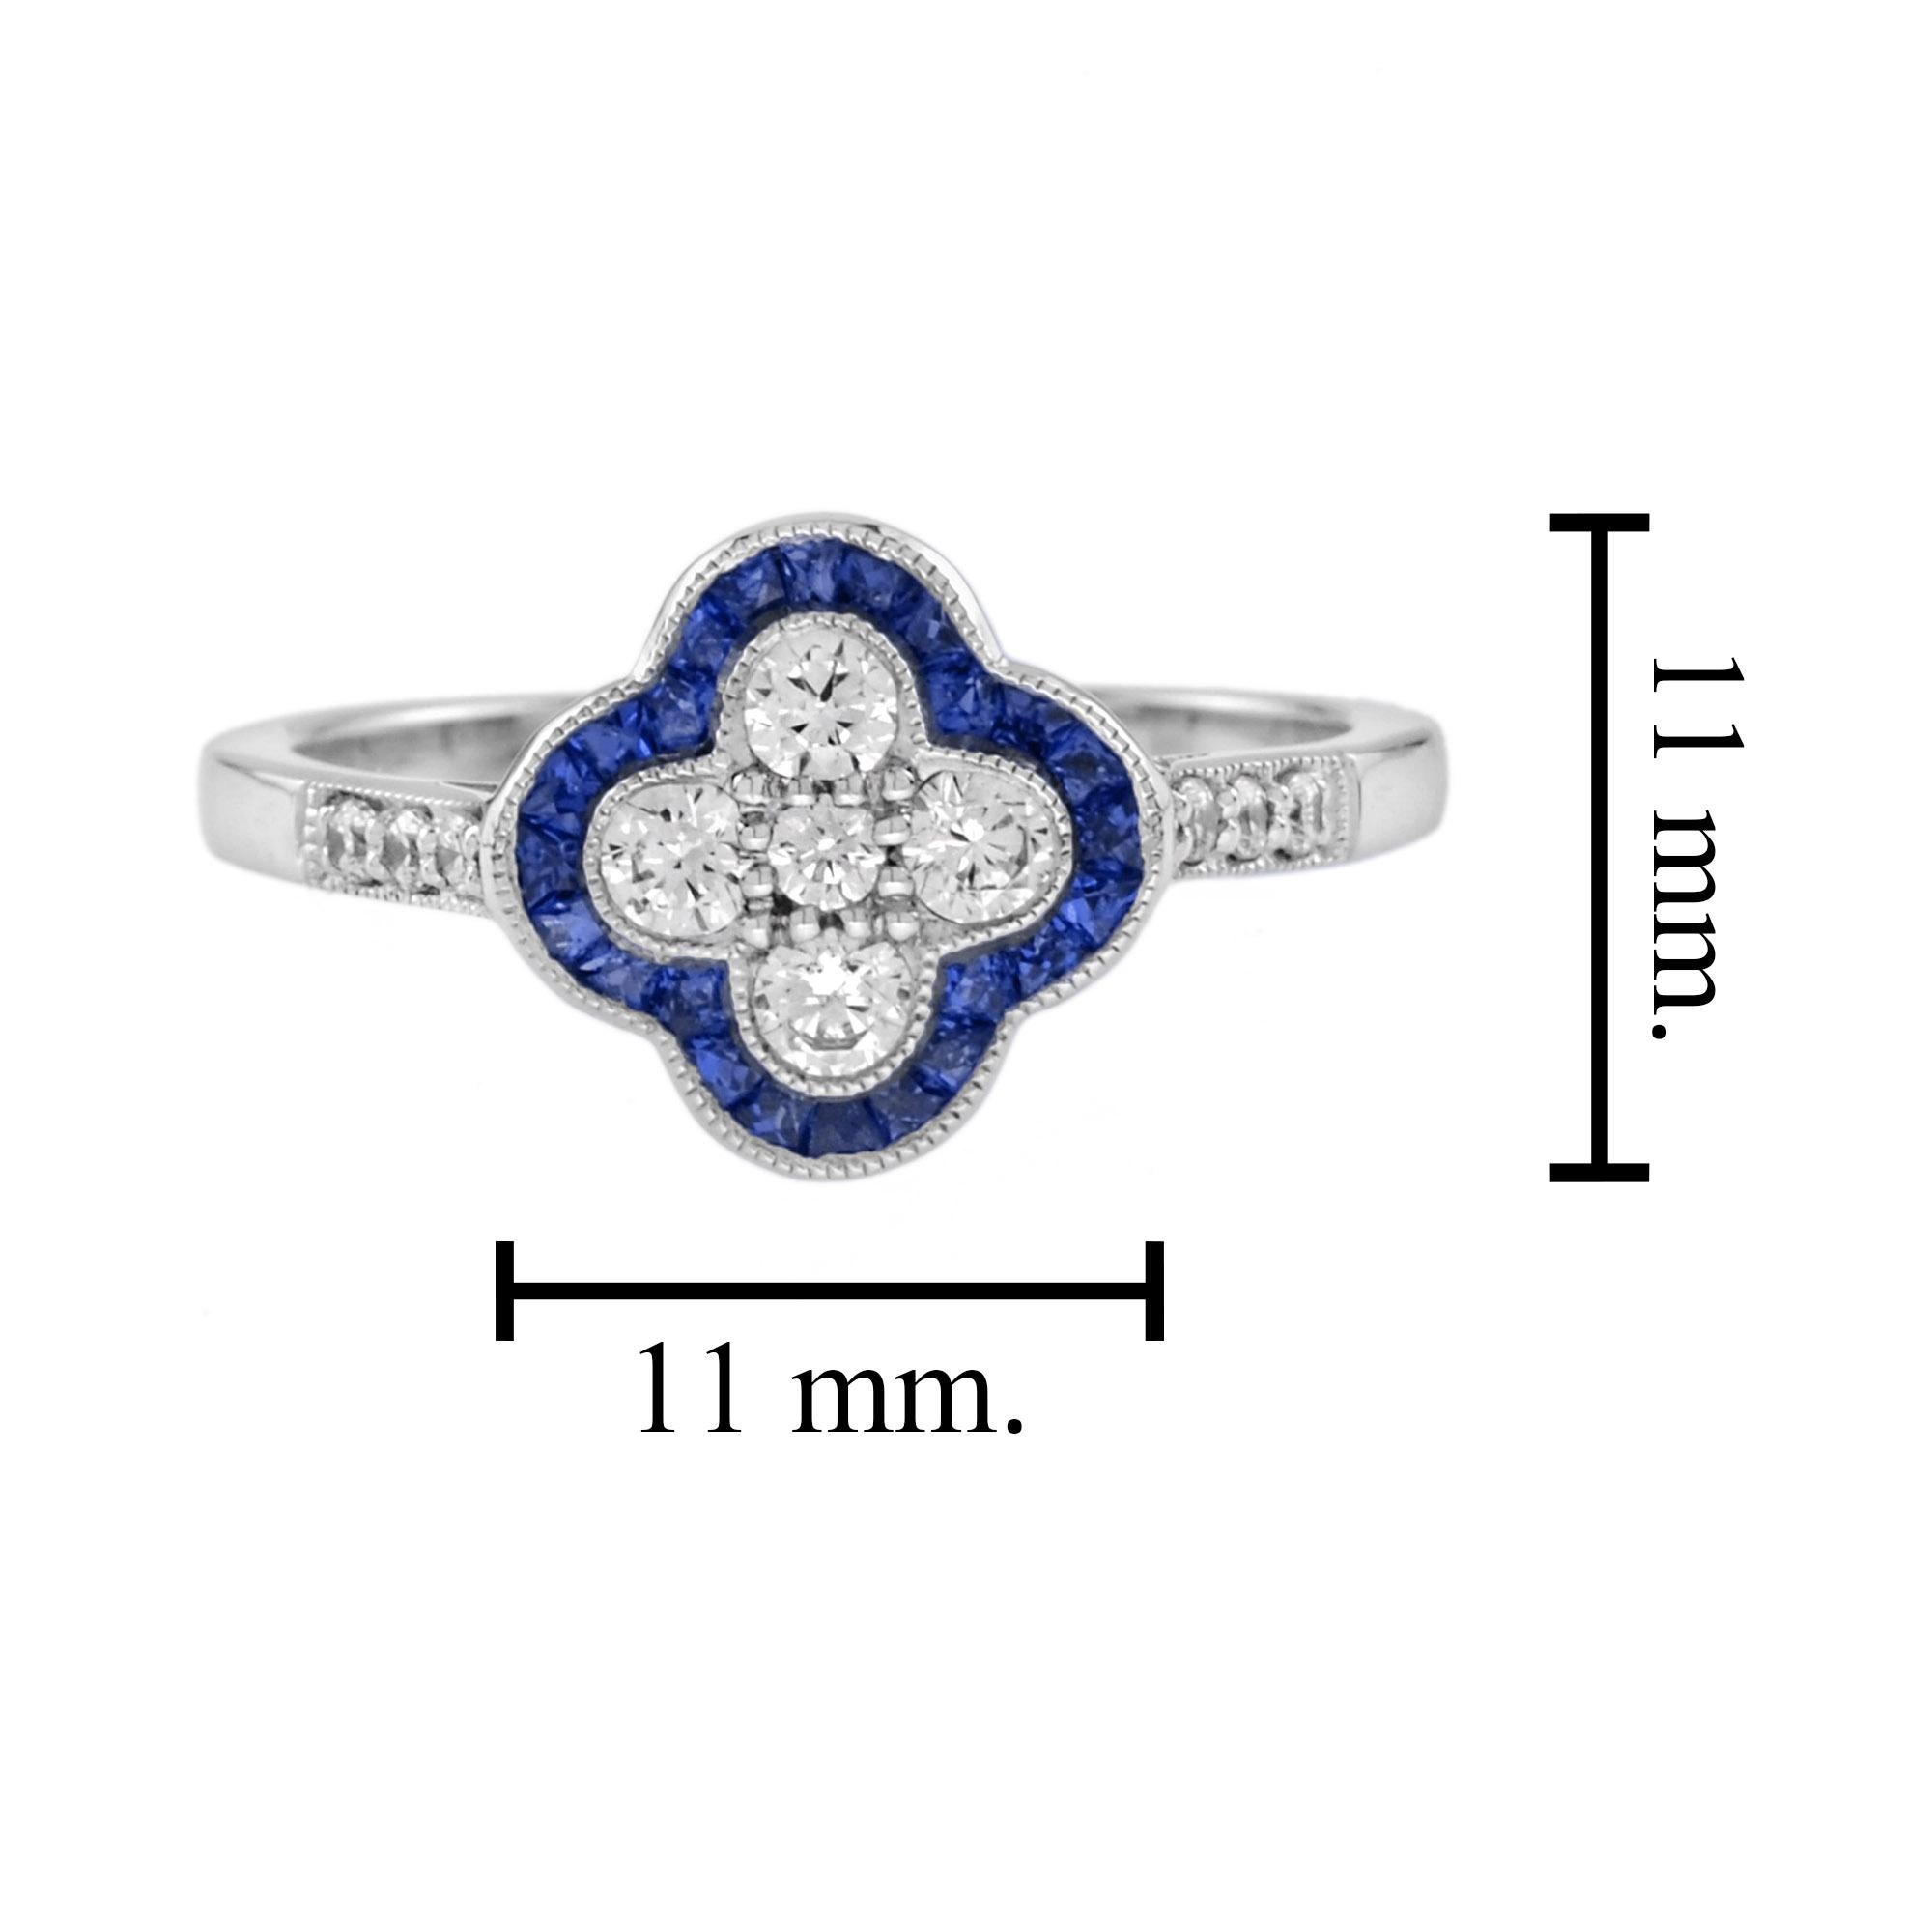 For Sale:  Diamond and Blue Sapphire Art Deco Style Floral Ring in 18K White Gold 6